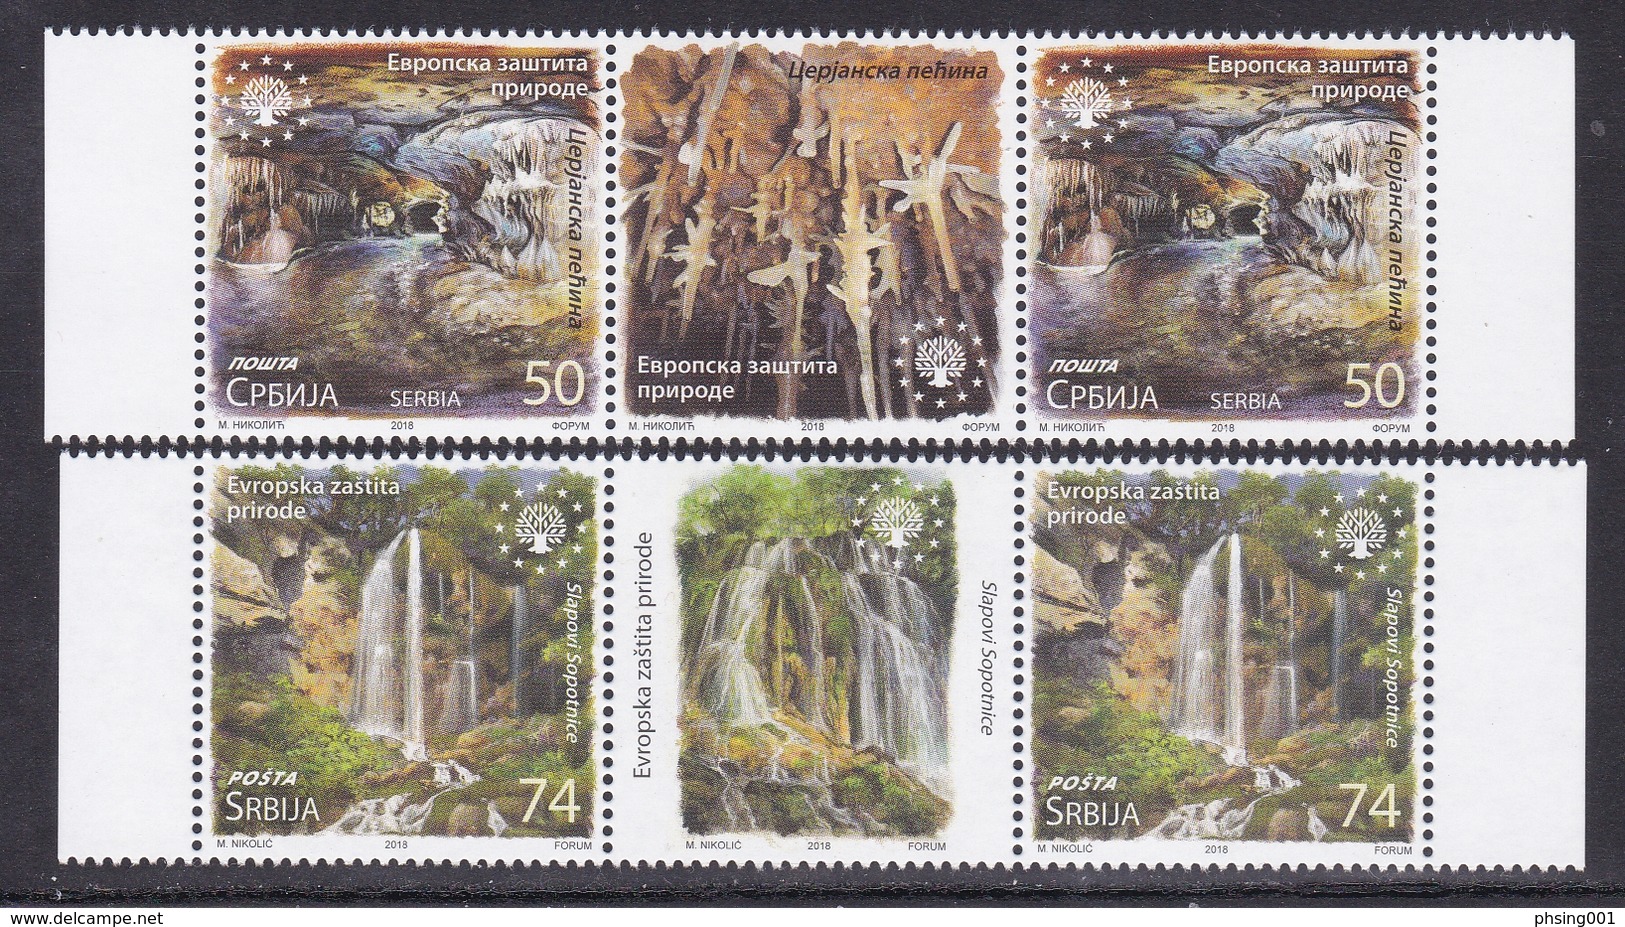 Serbia 2018 European Nature Protection, Sopotnica Waterfalls, Cerje Cave Natural Monument Geology, Middle Row MNH - Serbie